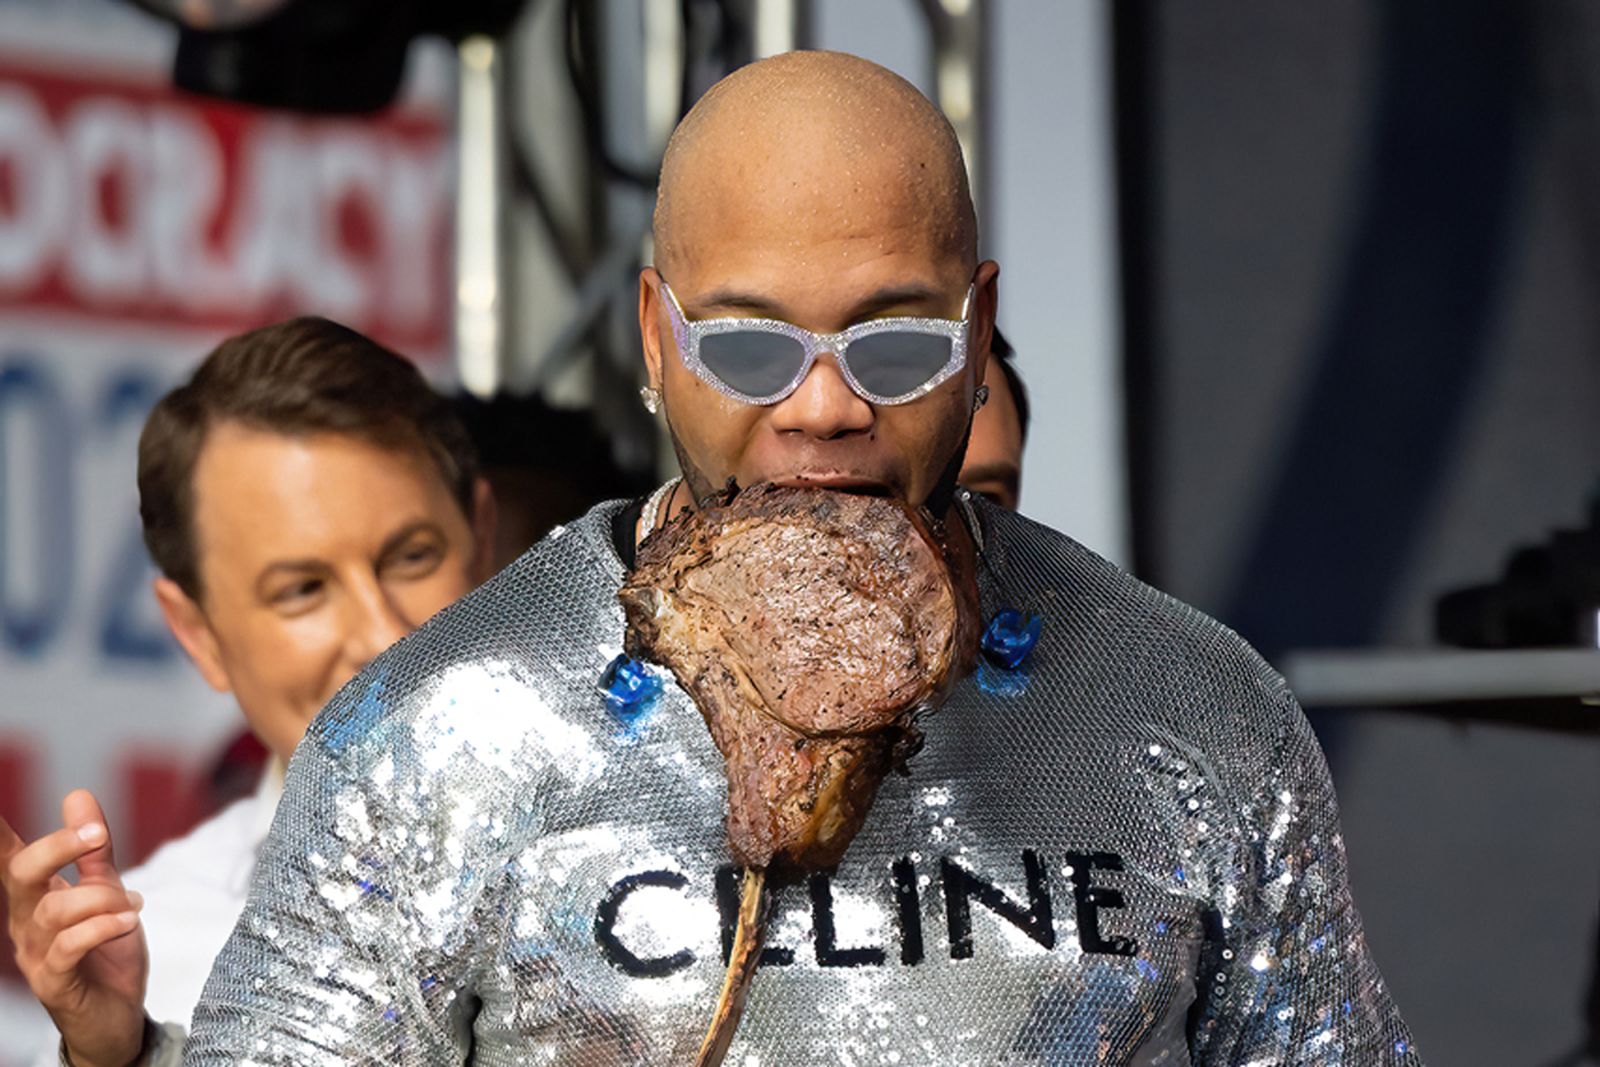 flo-rida-fox-and-friends-concert-steak-outfit